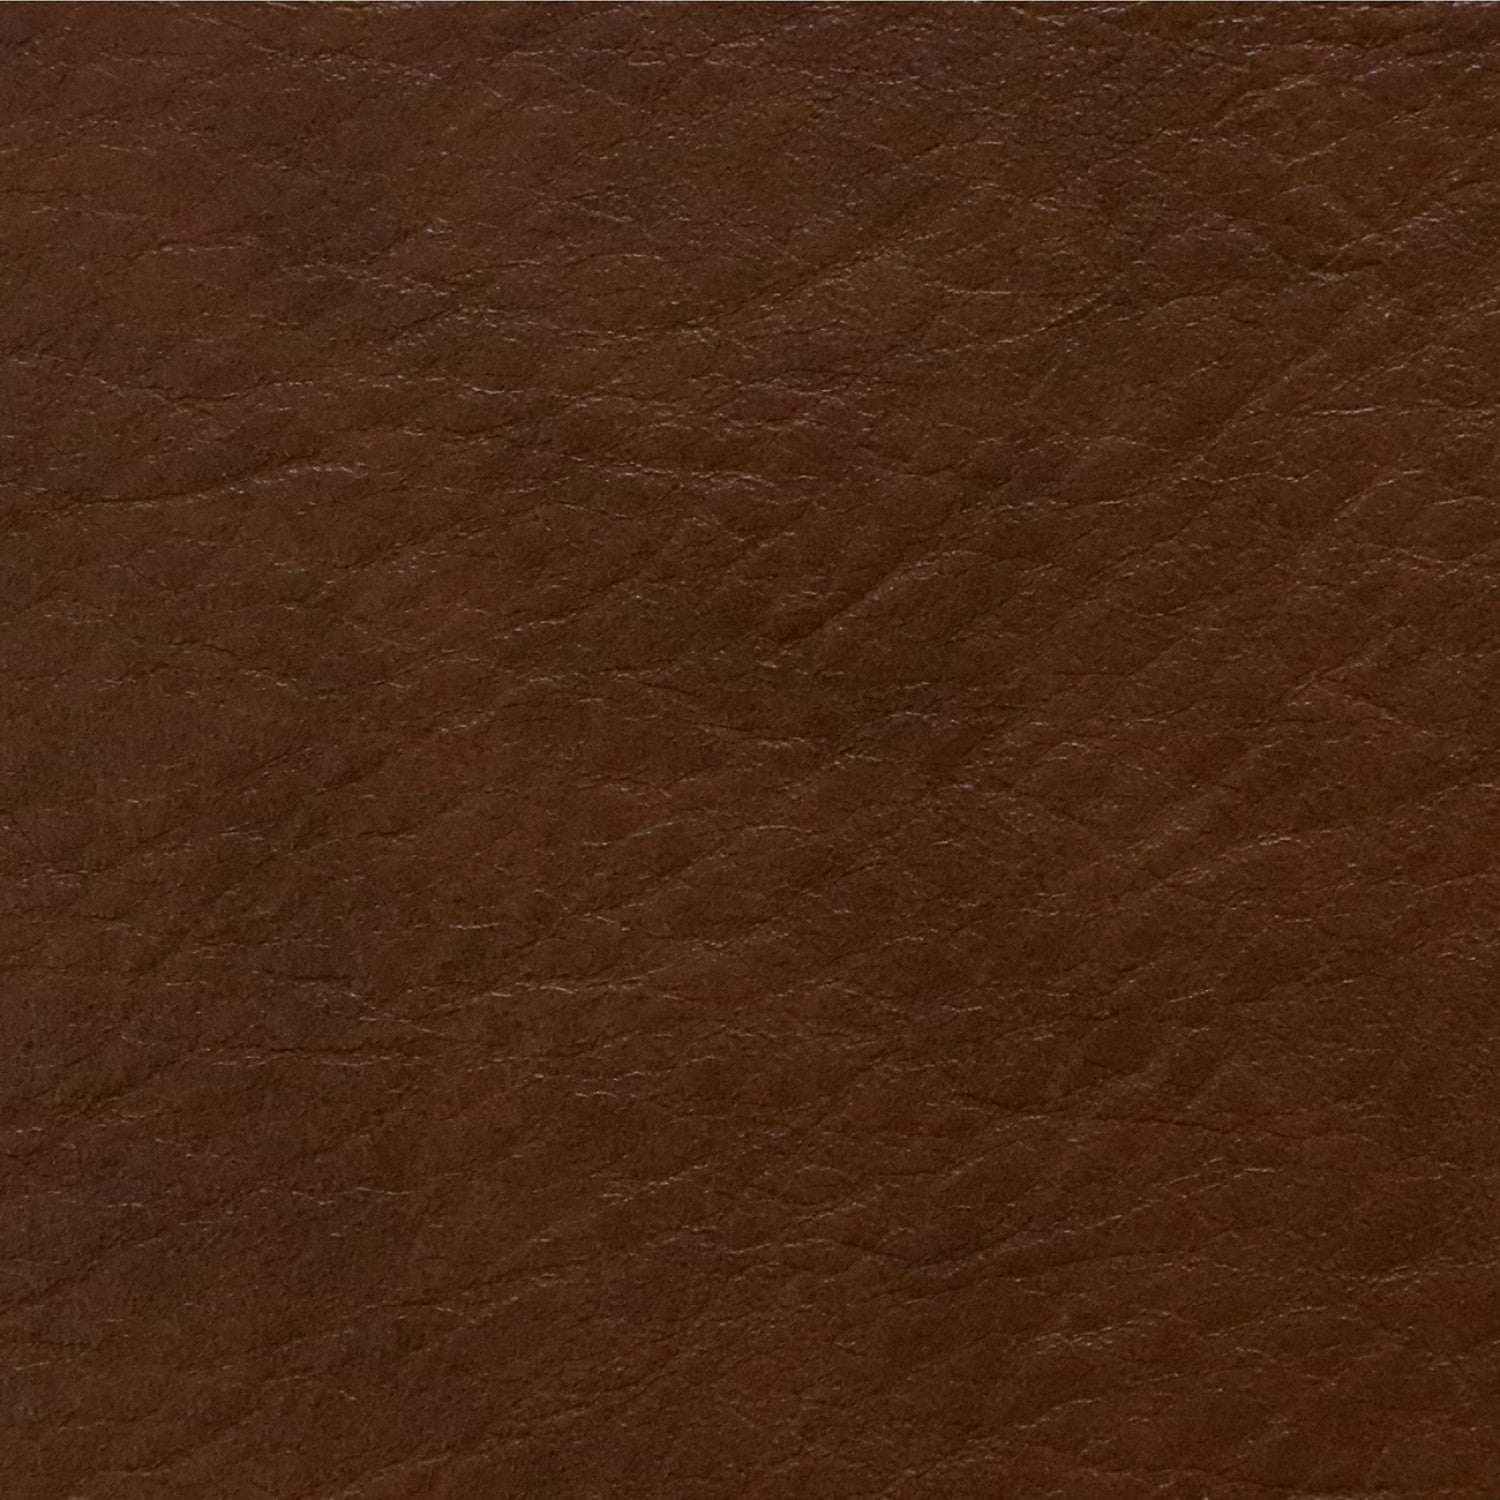 Faux Leather, Brown Legacy 1/2 yard HFLL1219